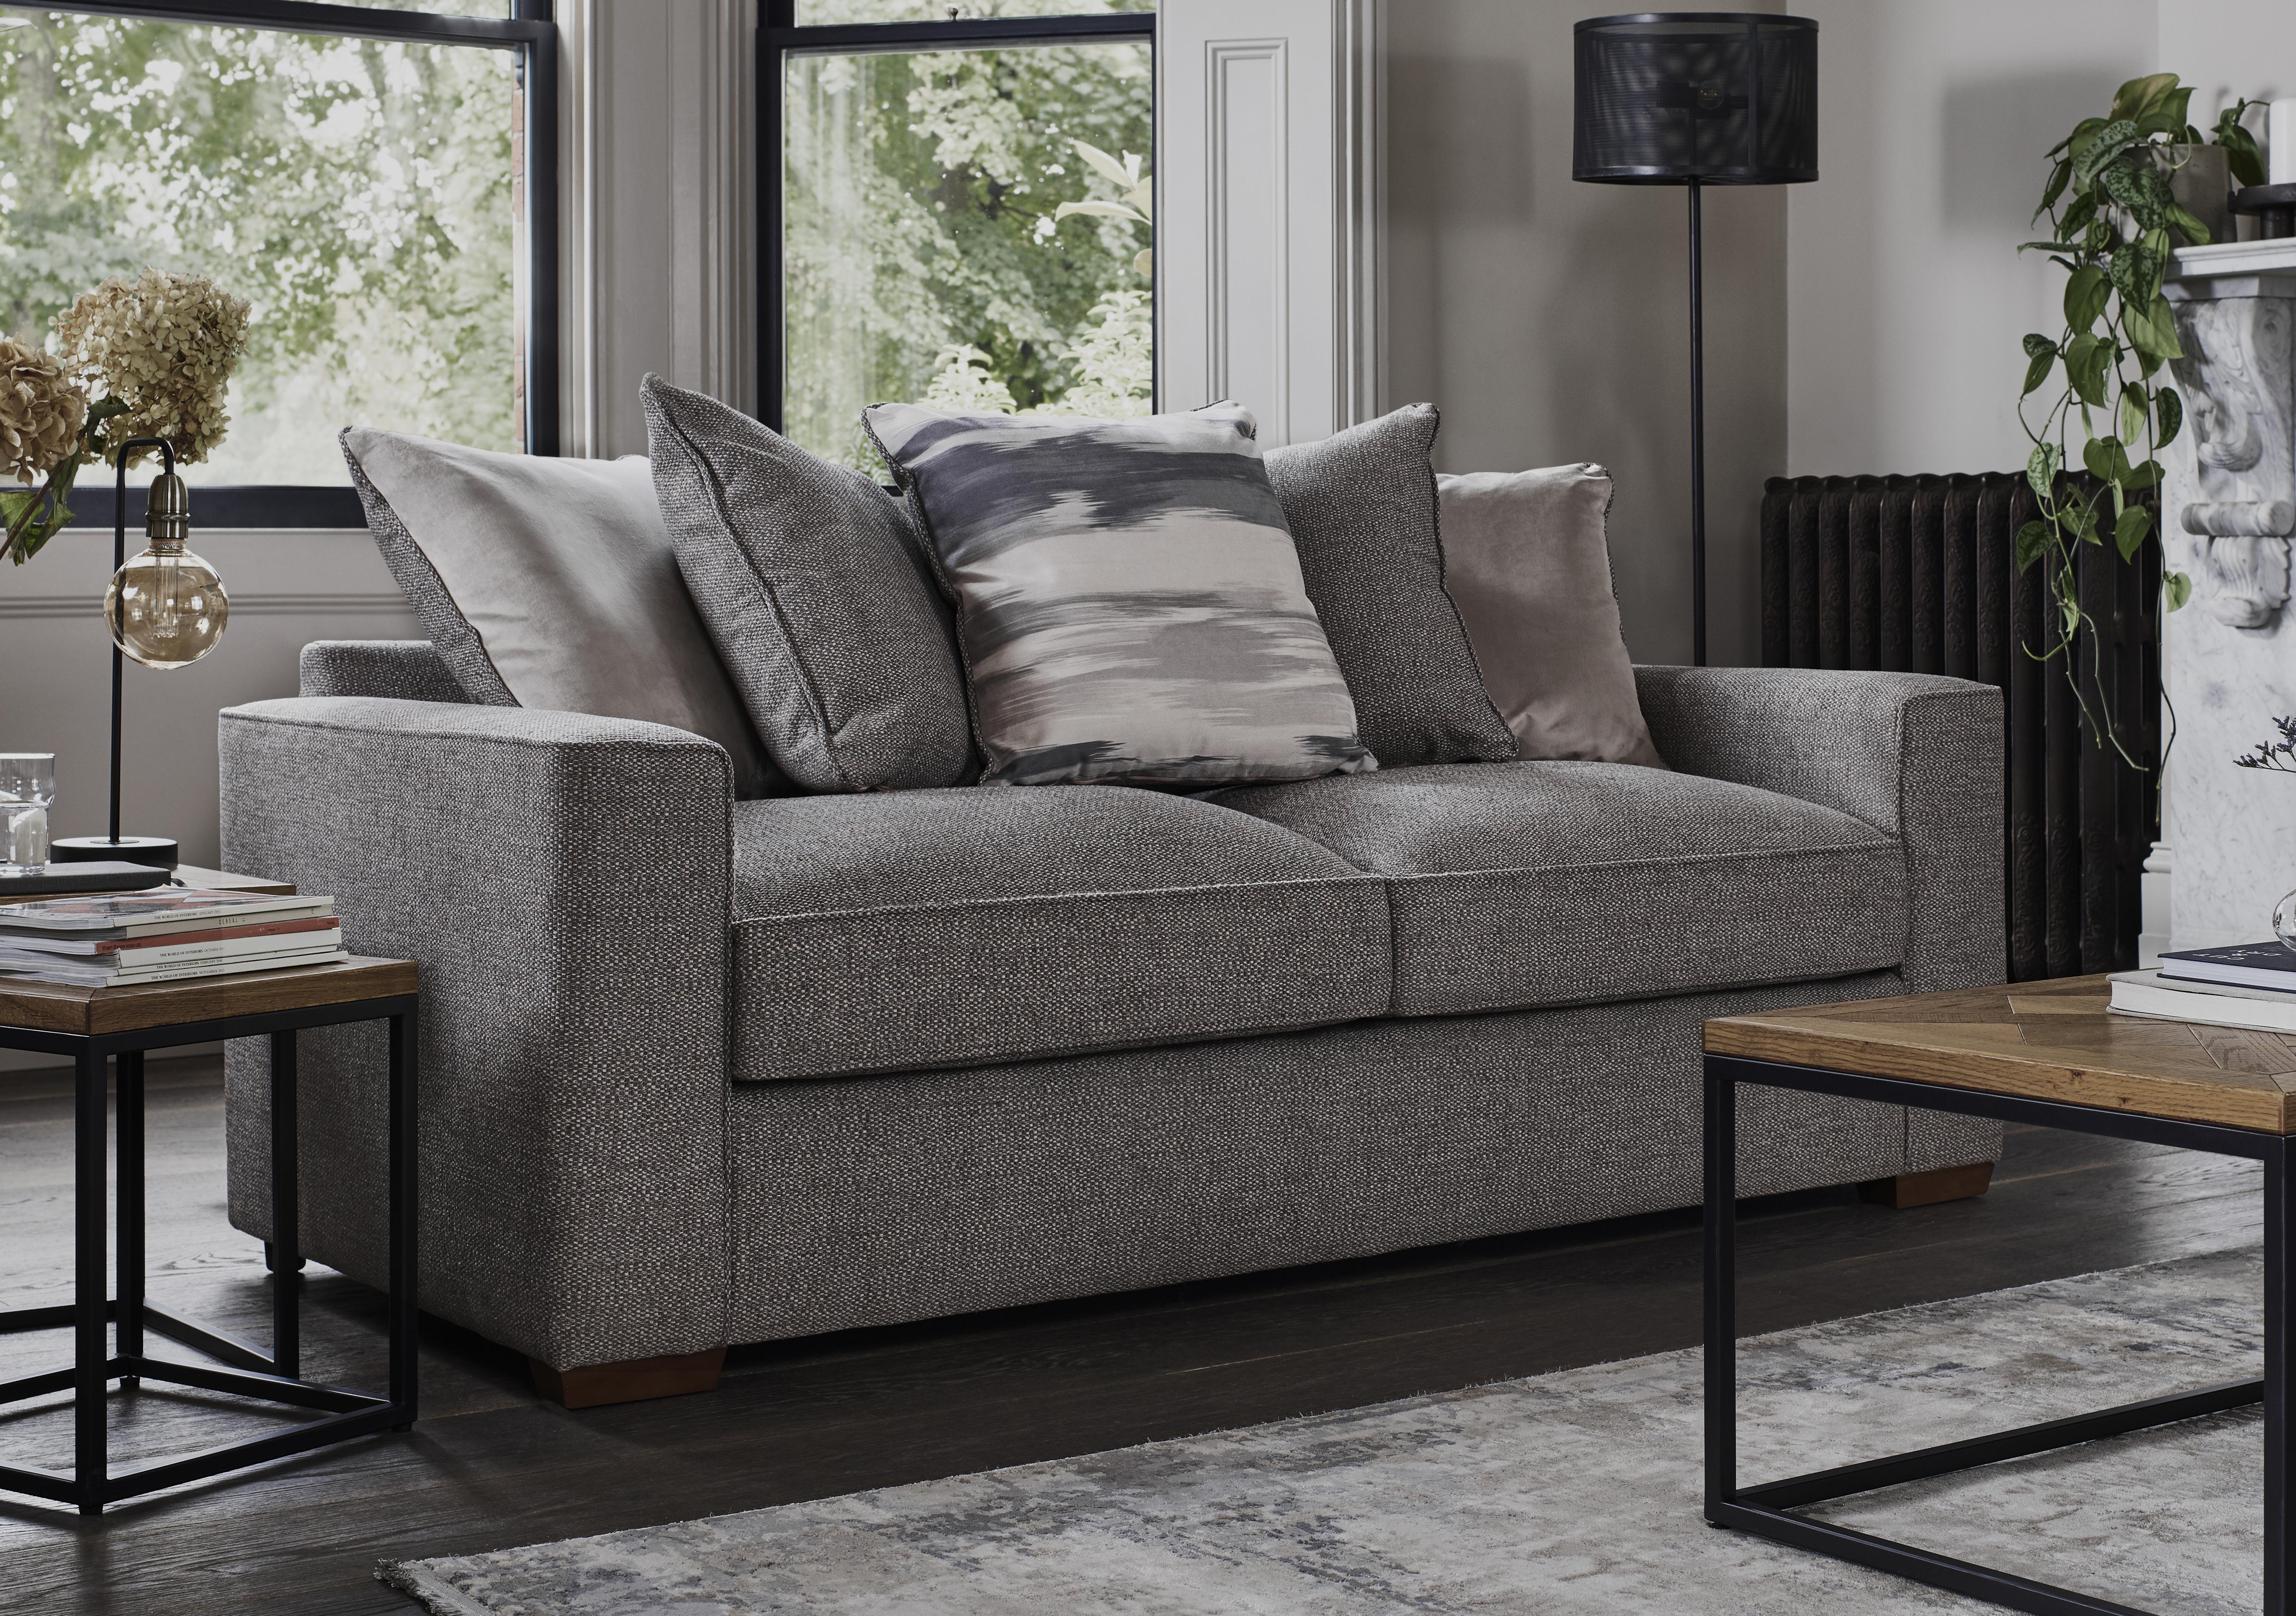 Cory 3 Seater Fabric Scatter Back Sofa Bed in  on Furniture Village